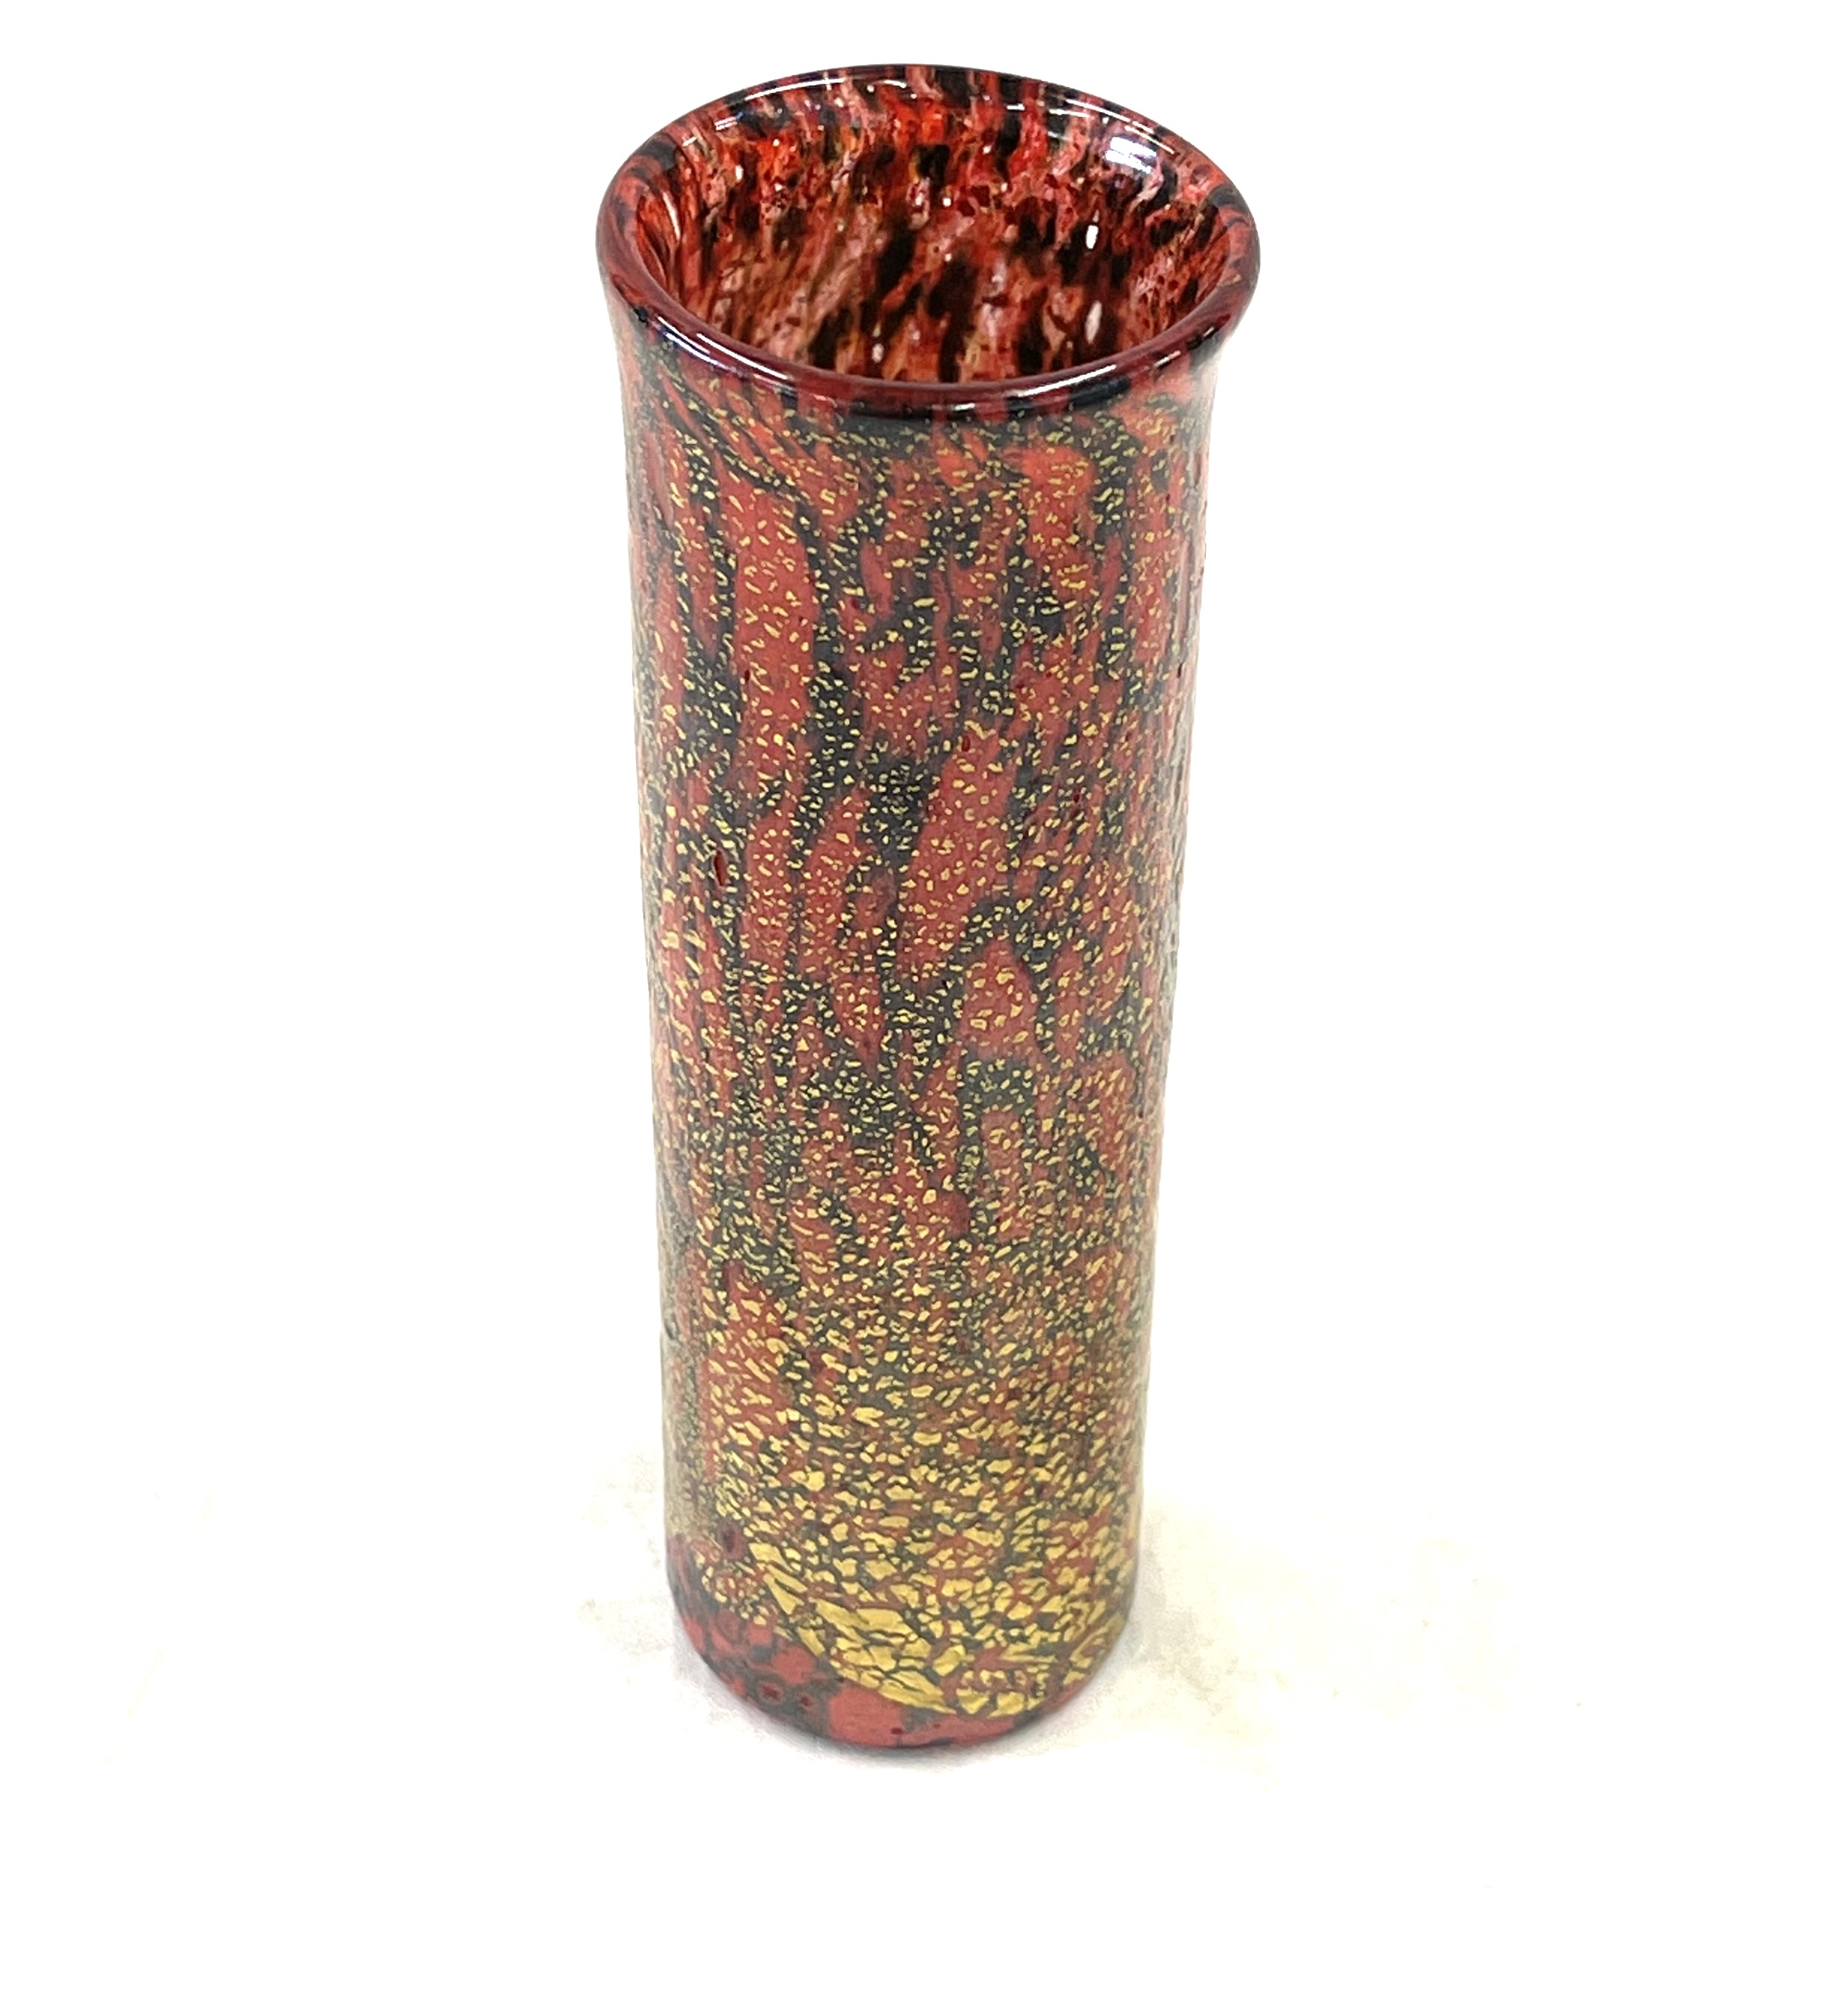 A very rare Isle of Wight Studio Glass 'Firecracker' cylinder vase, designed by Timothy Harris in - Image 2 of 7